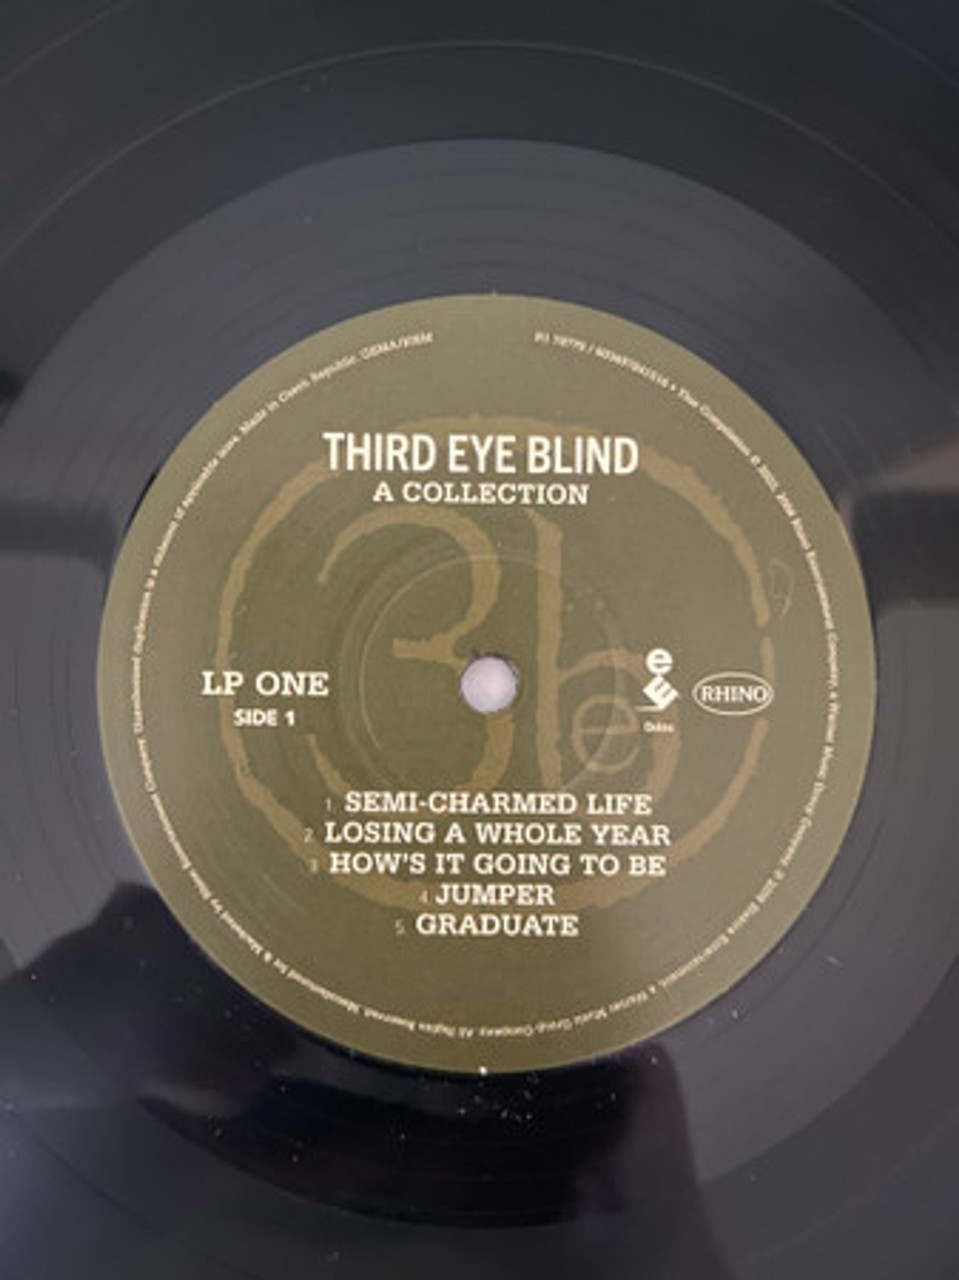 A Collection - Third Eye Blind (#603497841516)